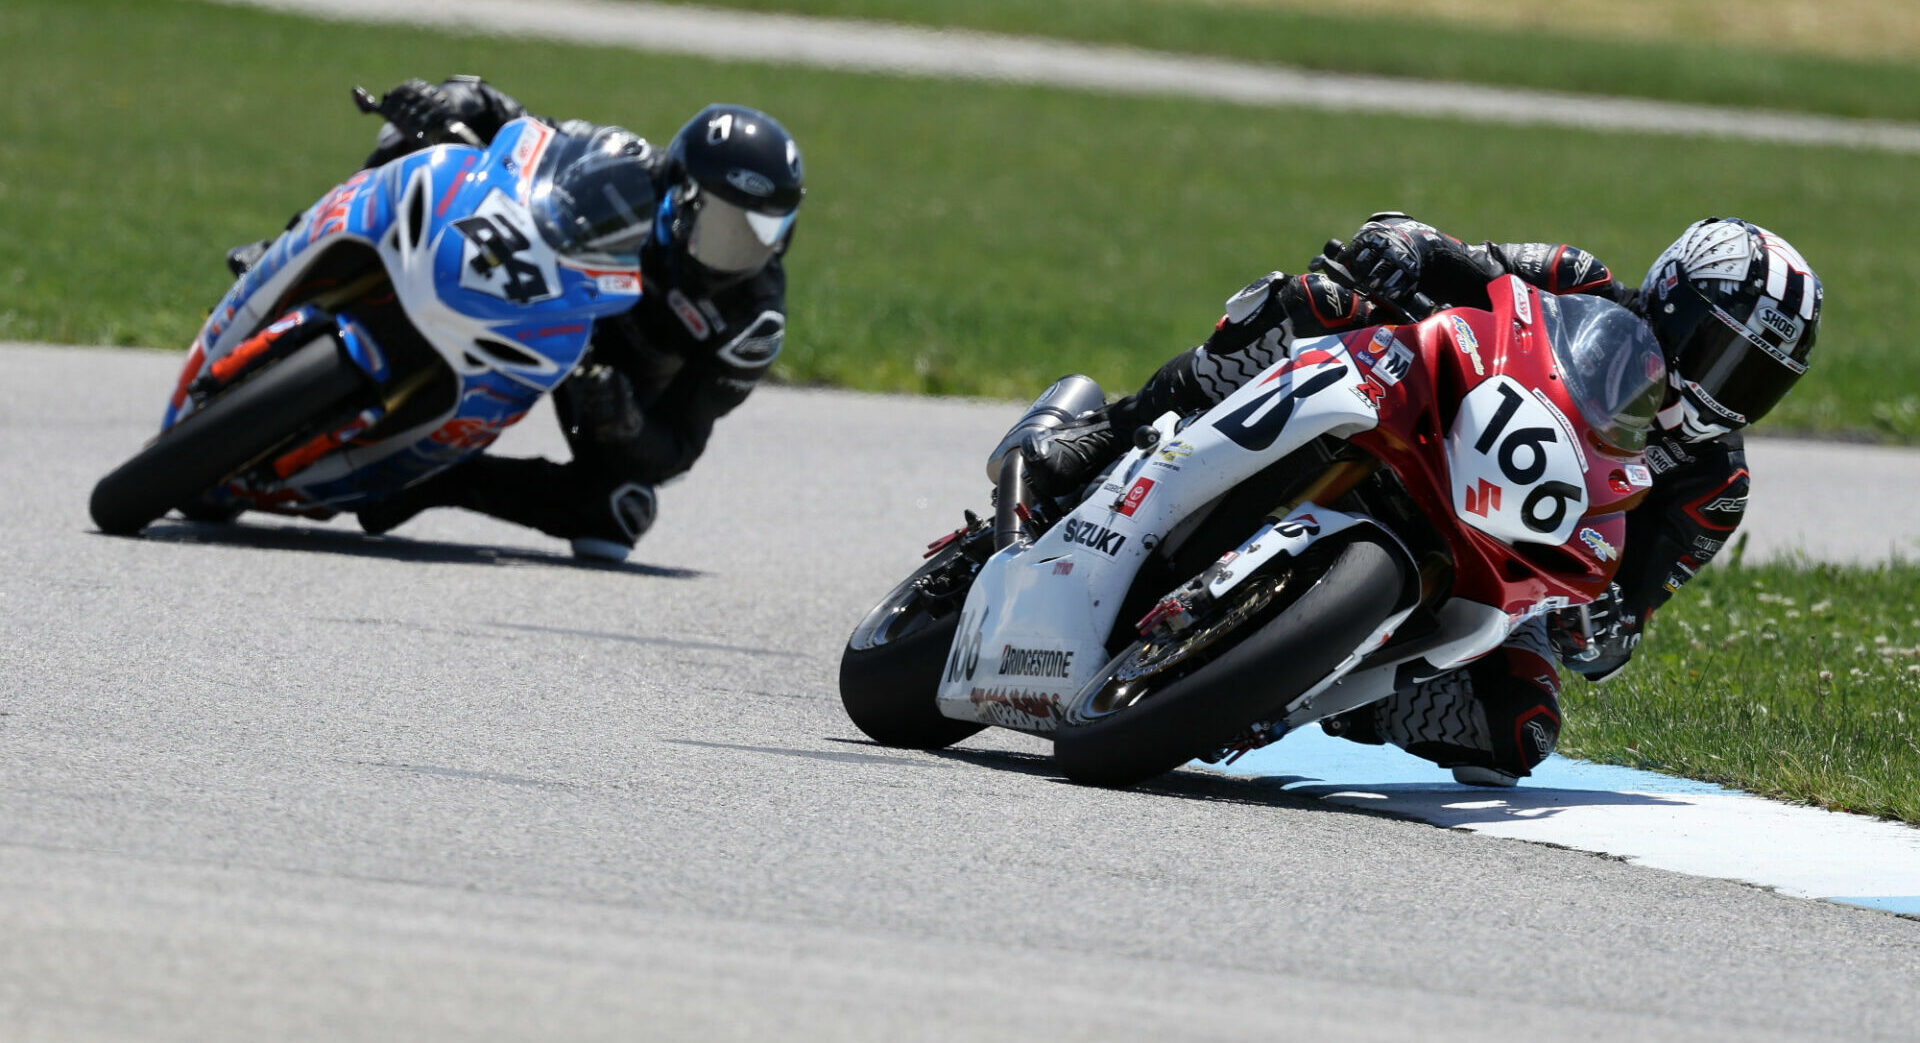 Trevor Daley (166) came back to win Sunday's Pro Sport Bike race at Grand Bend Motorplex after running off-track into the grass early in the 18 lap final. Fellow Suzuki rider Sebastien Tremblay (24) was second ahead of Zoltan Frast in third. Photo by Rob O'Brien, courtesy CSBK.